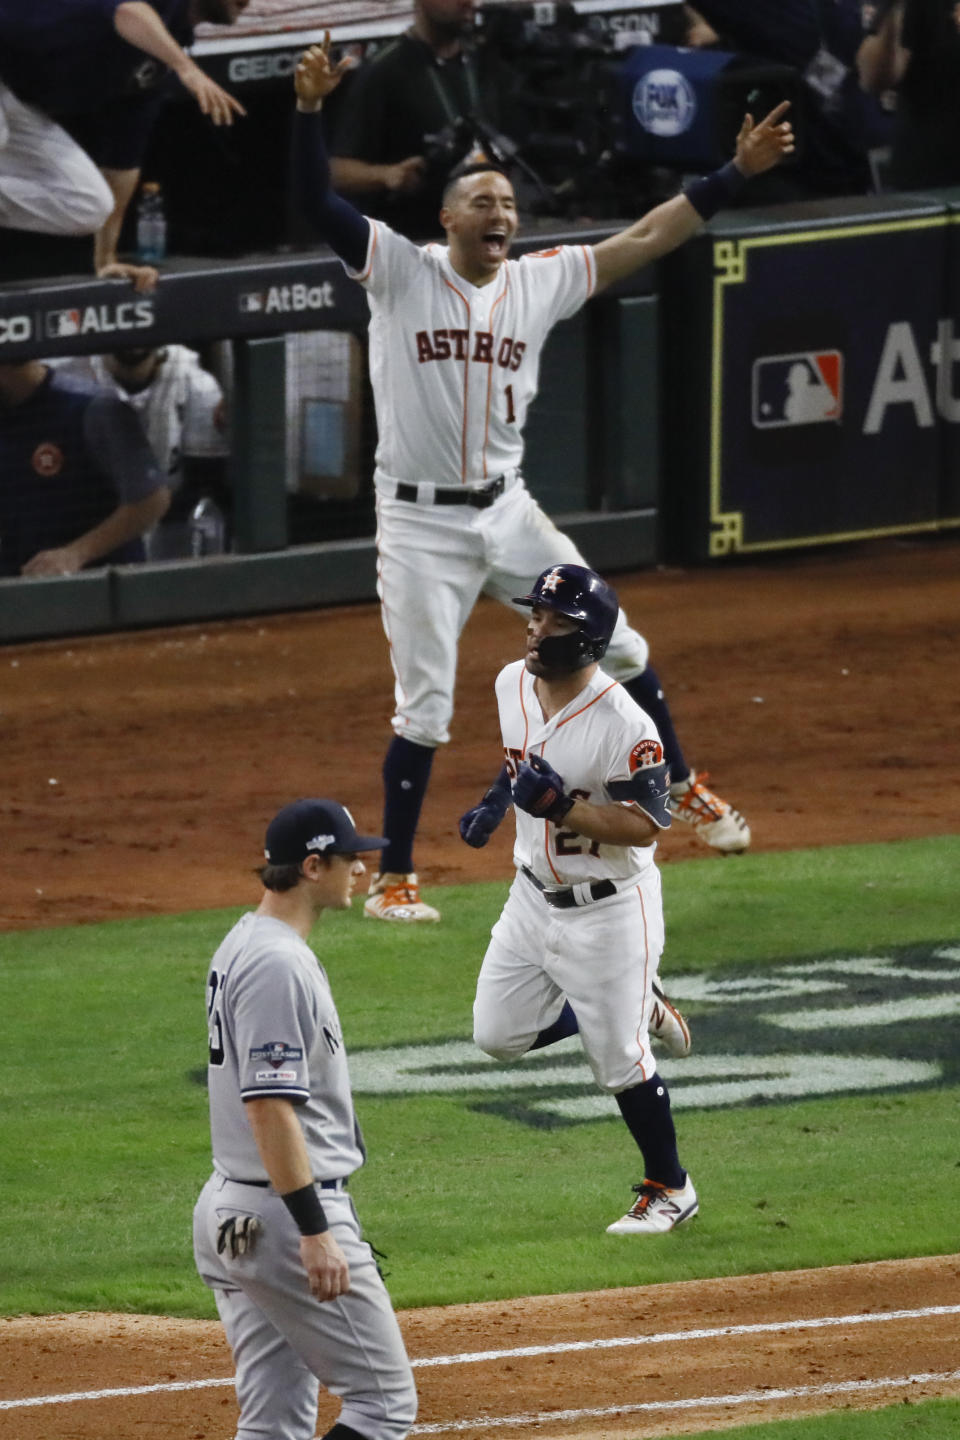 Houston Astros' Jose Altuve rounds the bases after a two-run walk-off to win Game 6 of baseball's American League Championship Series against the New York Yankees Saturday, Oct. 19, 2019, in Houston. The Astros won 6-4 to win the series 4-2. (AP Photo/Sue Ogrocki)